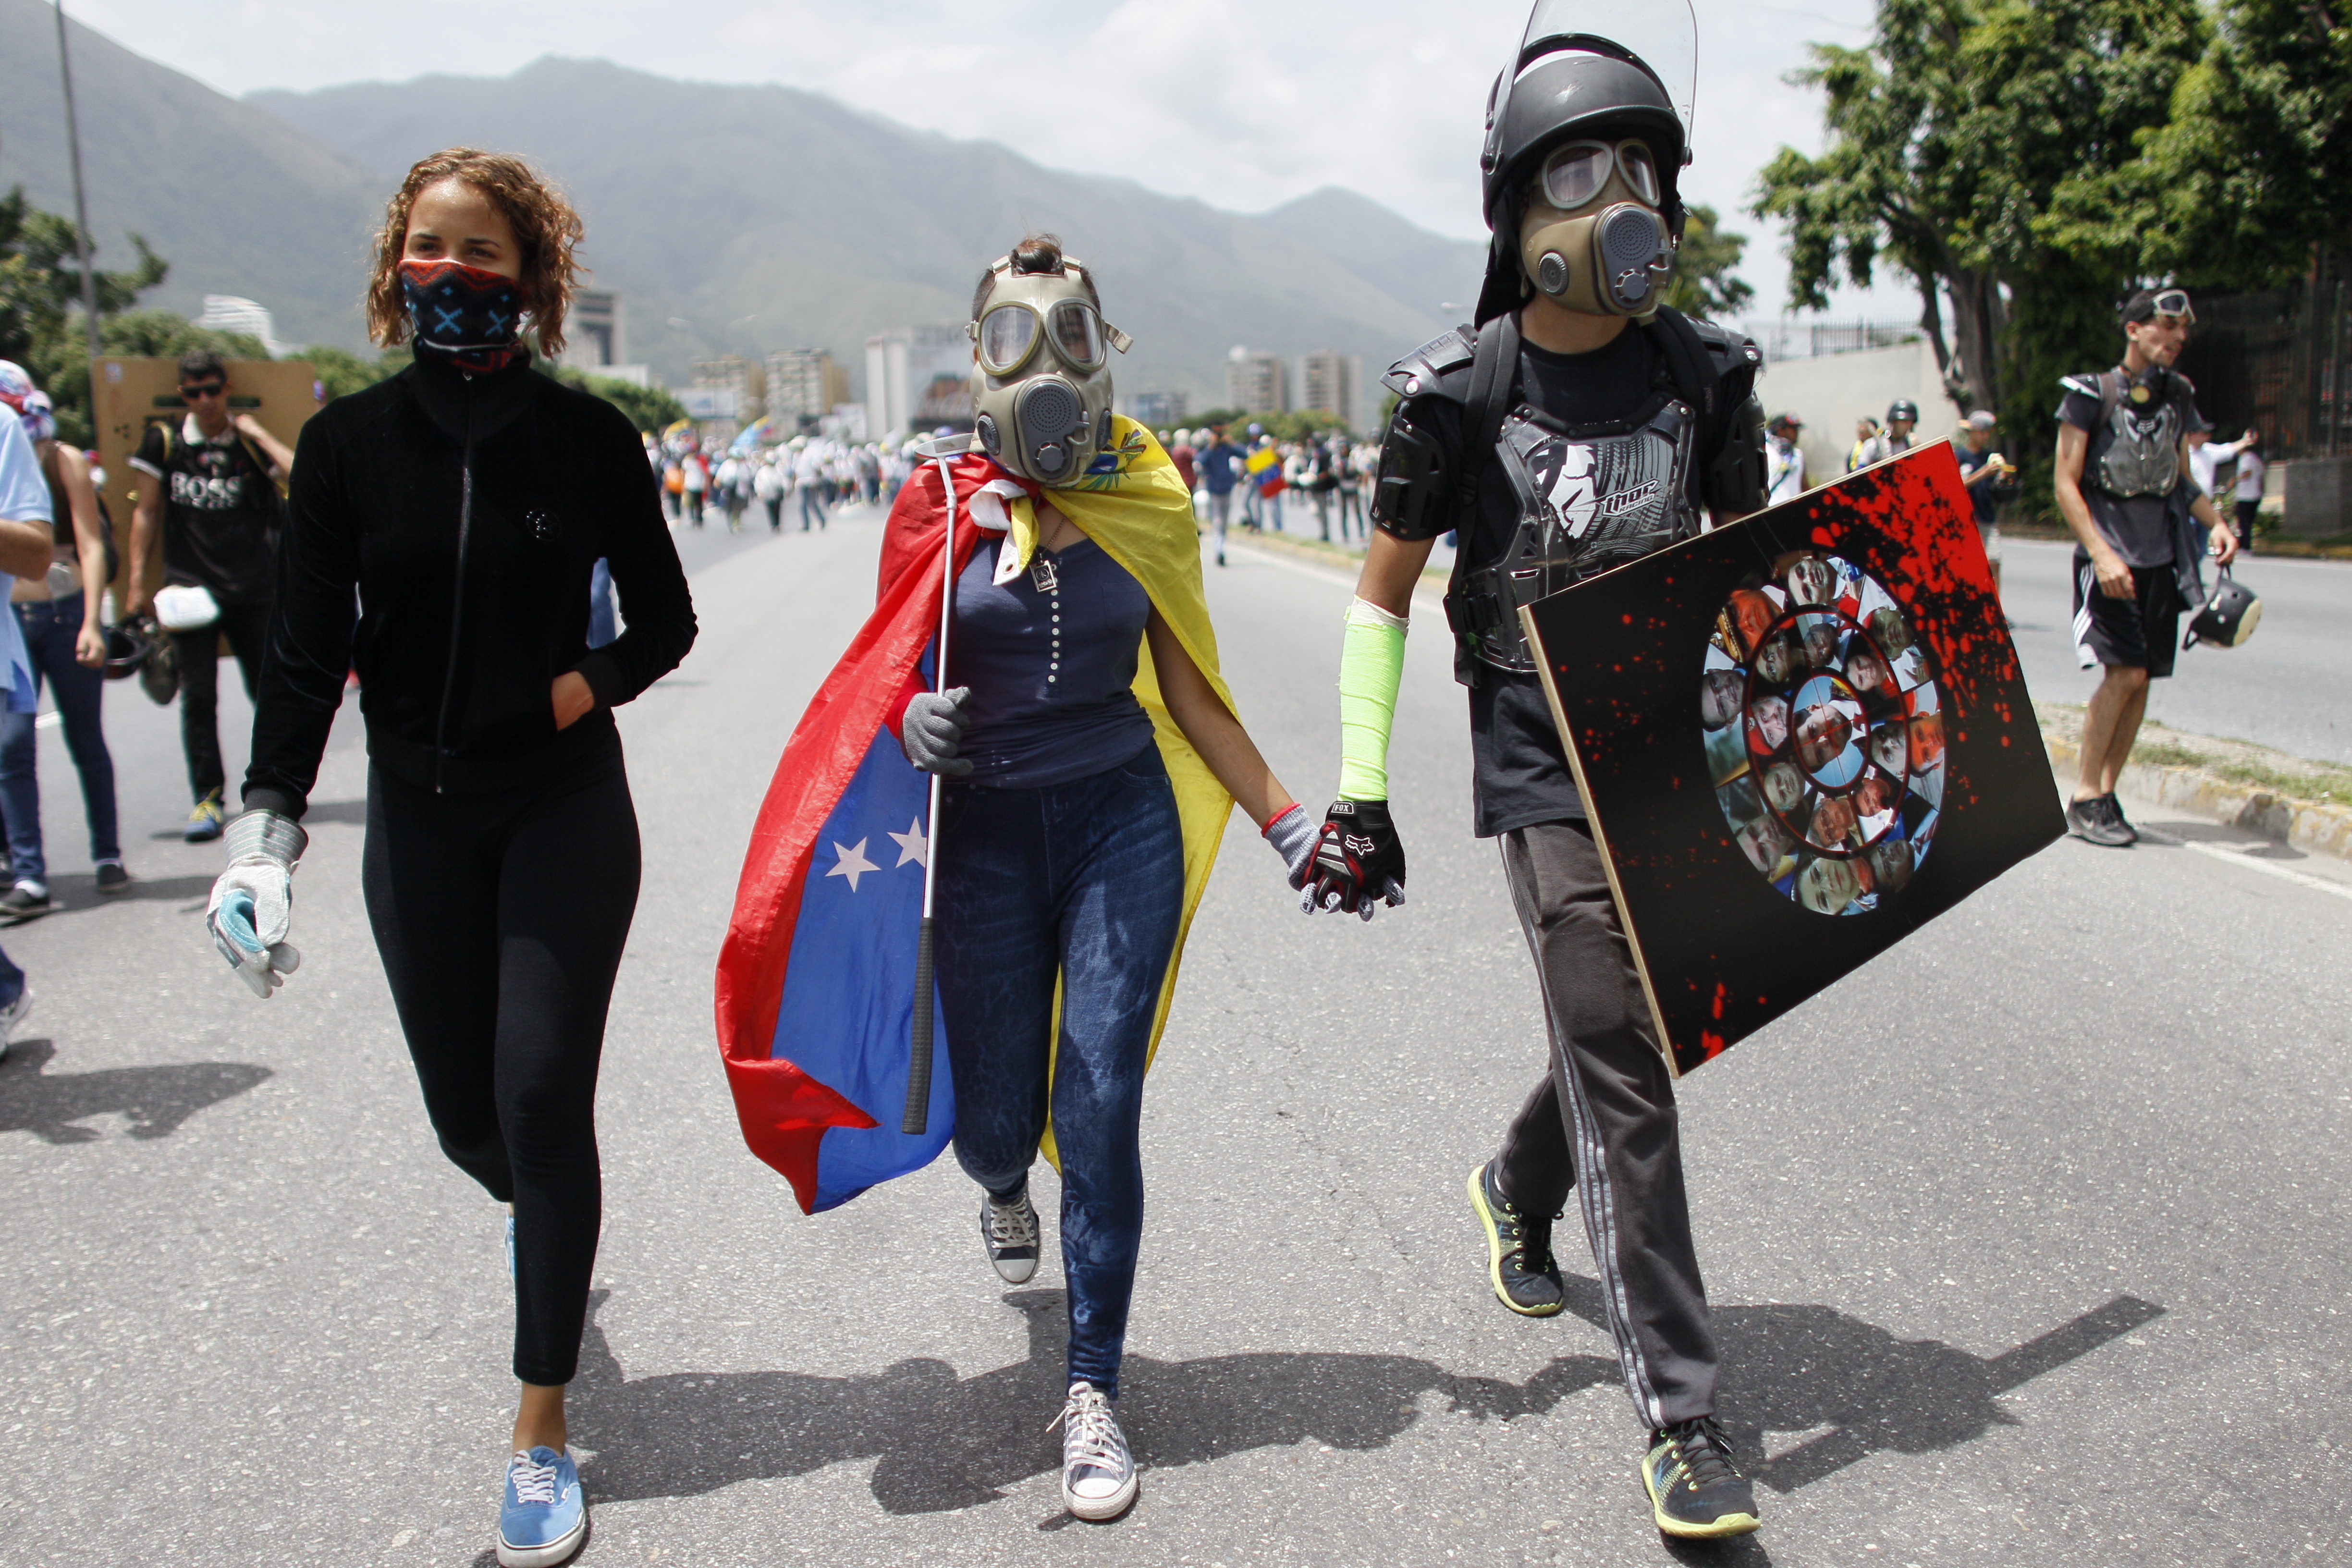 Masked demonstrators walk carrying a golf club, center, and homemade shield as they join a march against the government of President Nicolas Maduro in Caracas, Venezuela, Wednesday, May 31, 2017. Protests have left dozens dead in the last two months as the opposition demands immediate presidential elections and the liberation of political prisoners. (AP Photo/Ariana Cubillos)